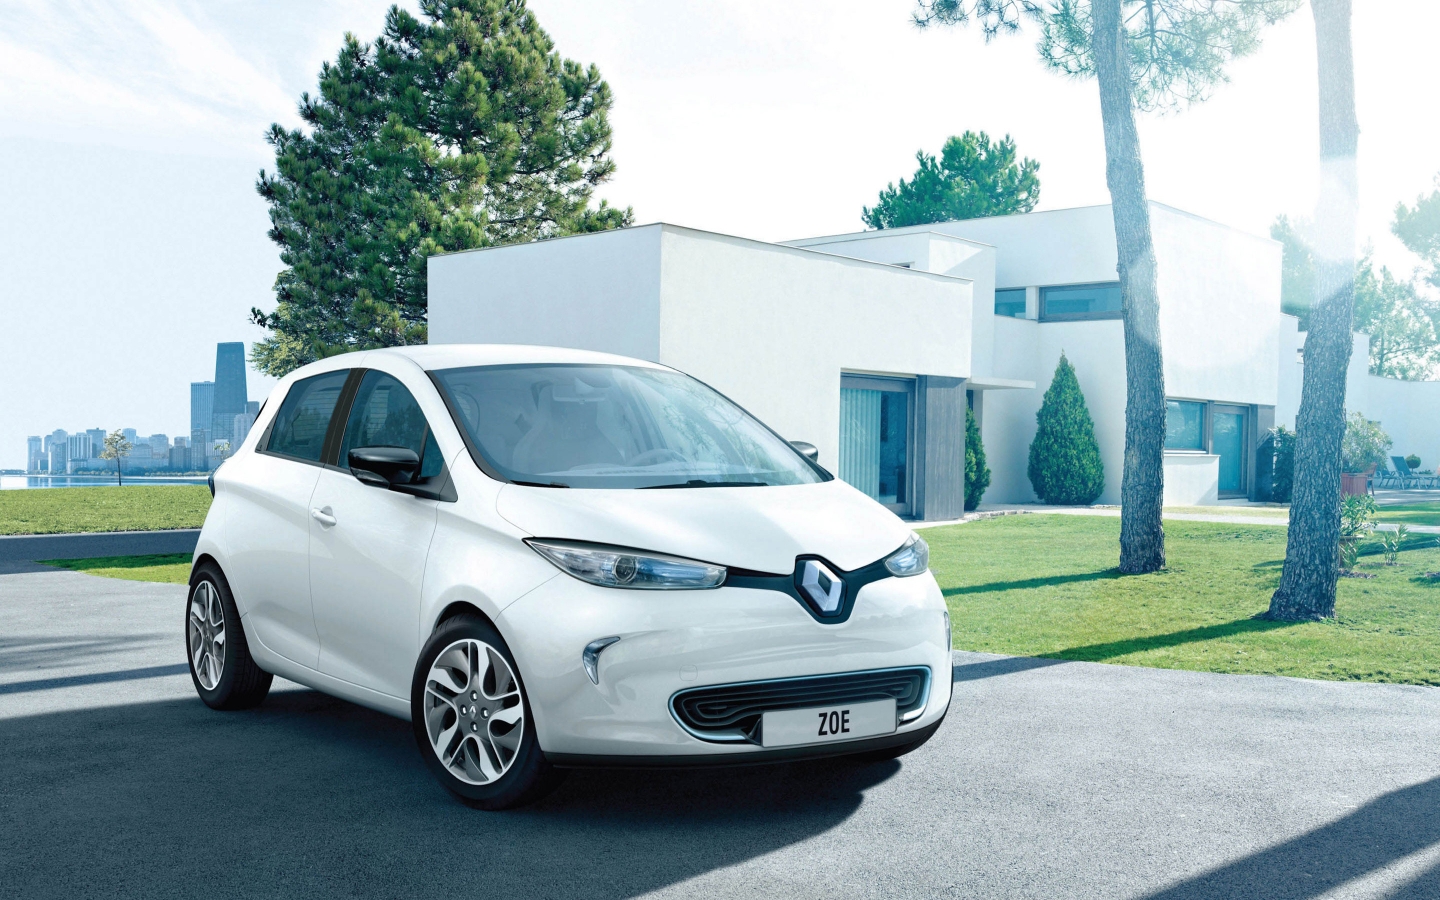 2013 Renault Zoe for 1440 x 900 widescreen resolution